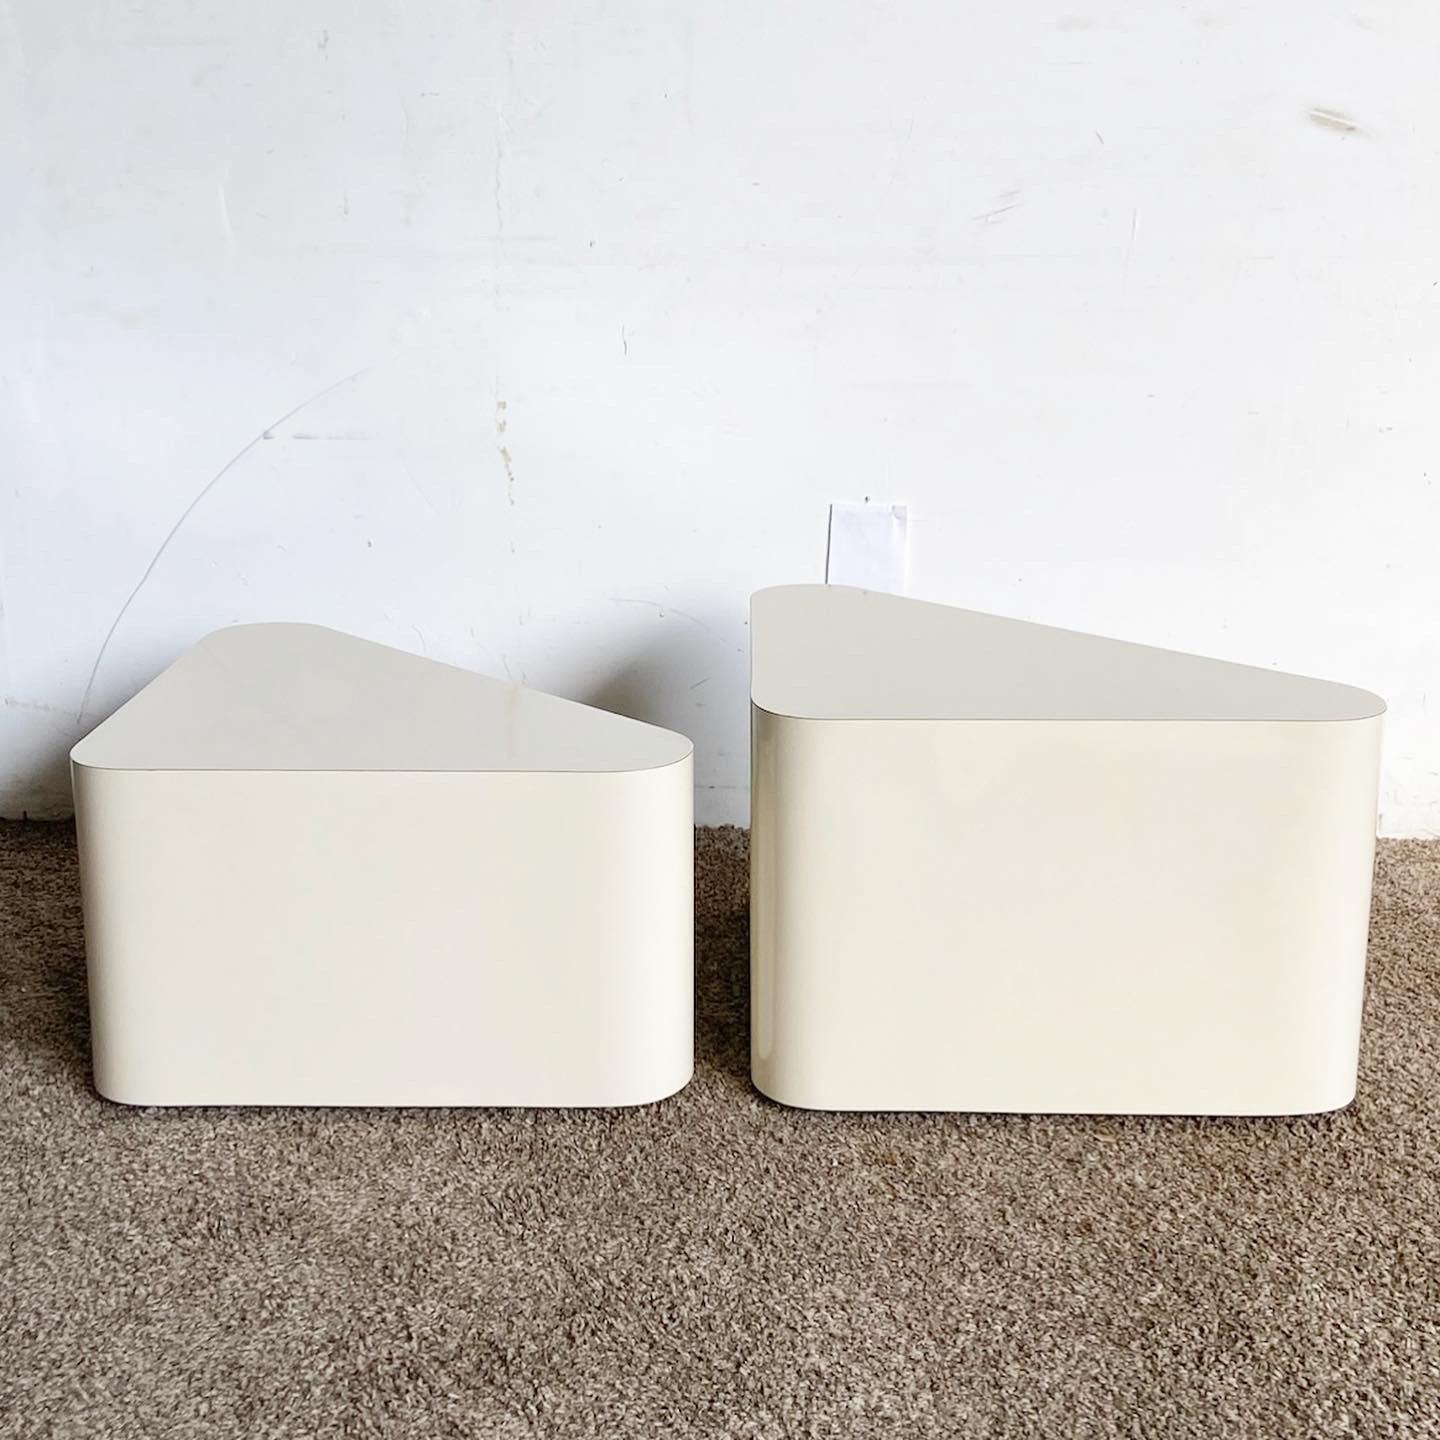 Late 20th Century Postmodern Cream Lacquer Laminate Triangular Nesting Side Tables